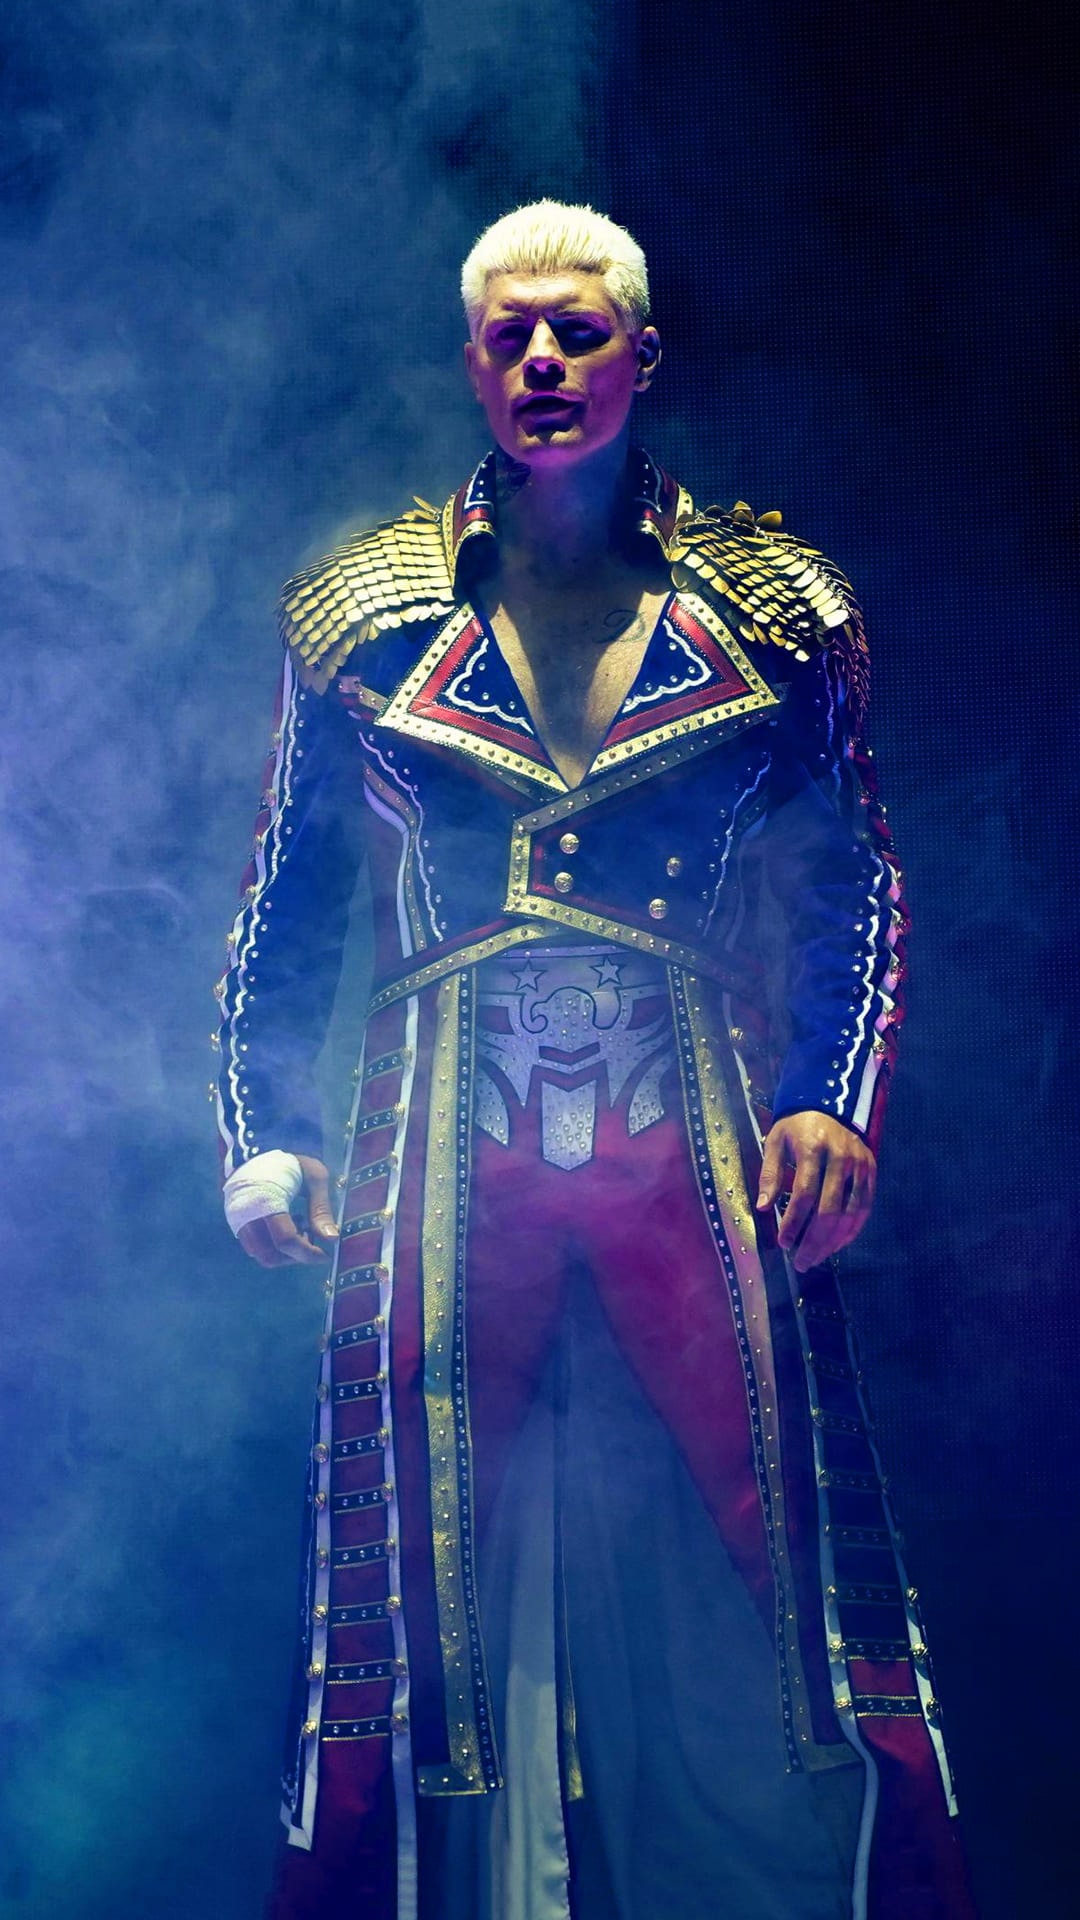 Cody Rhodes Wallpapers